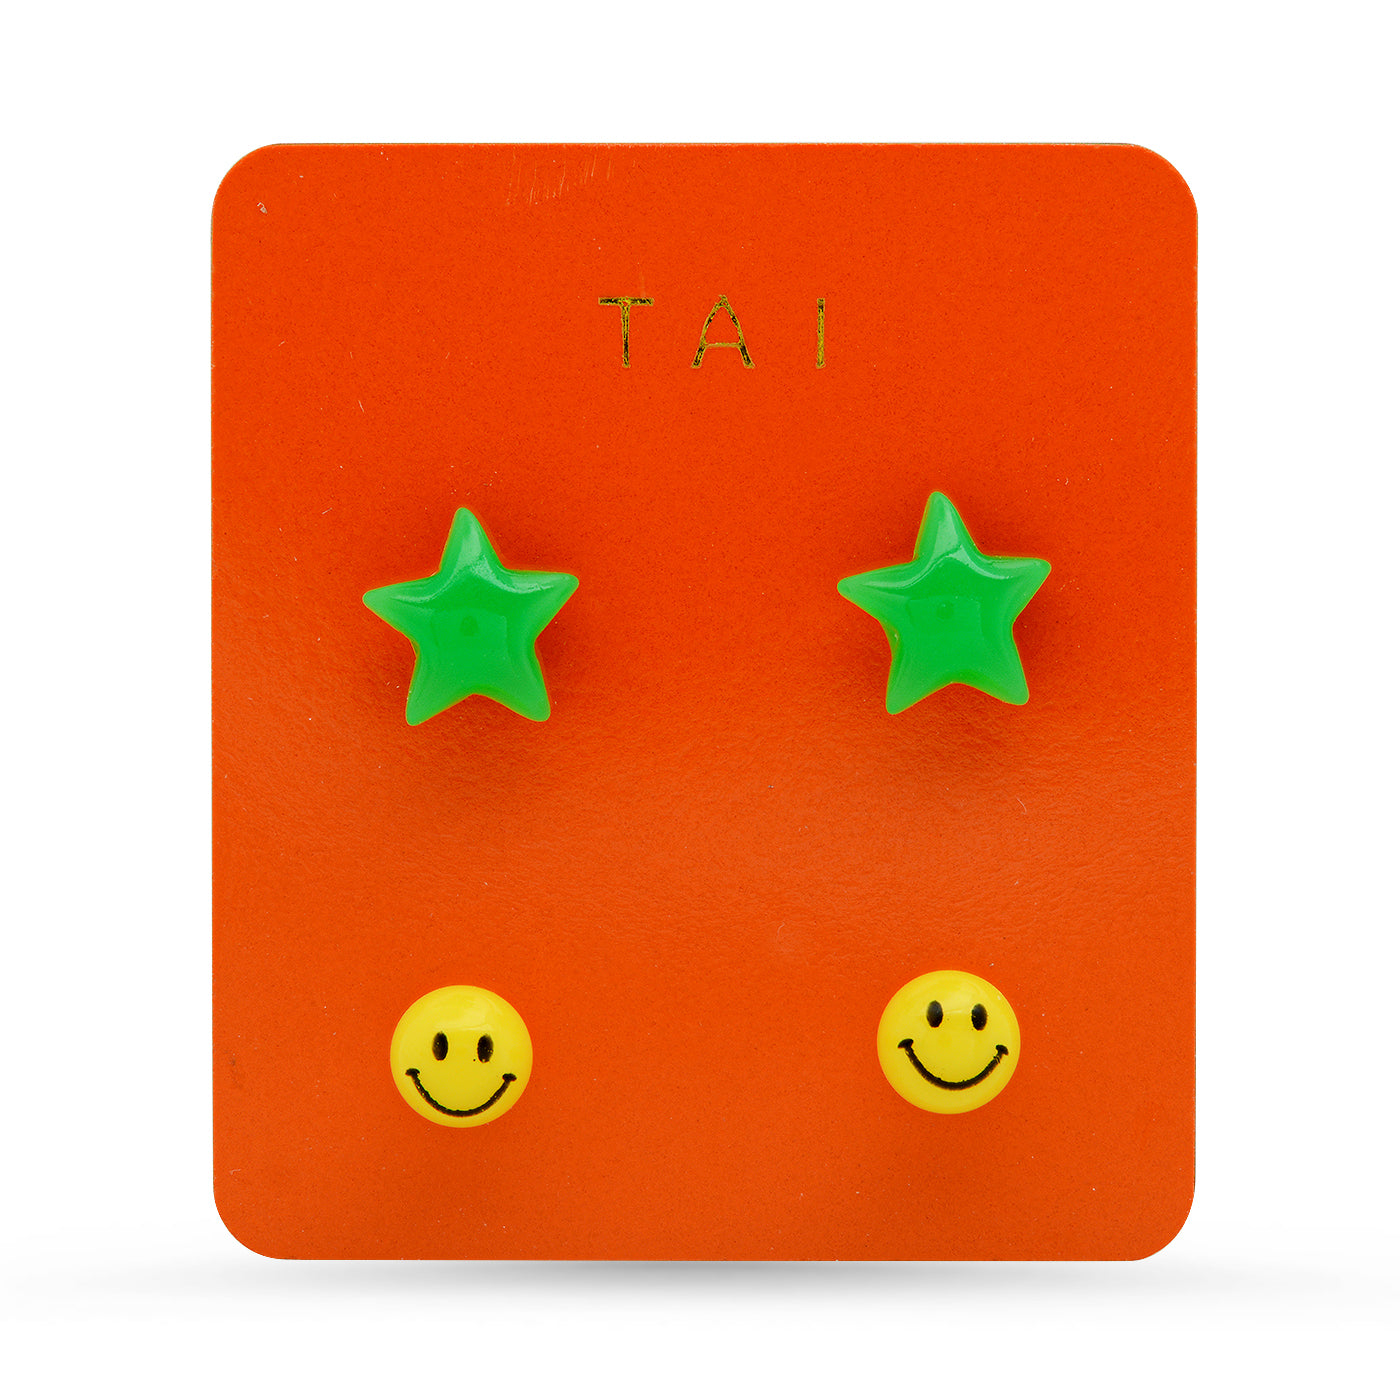 Tai Set of 2 Star and Smiley Face studs - 2 Colors